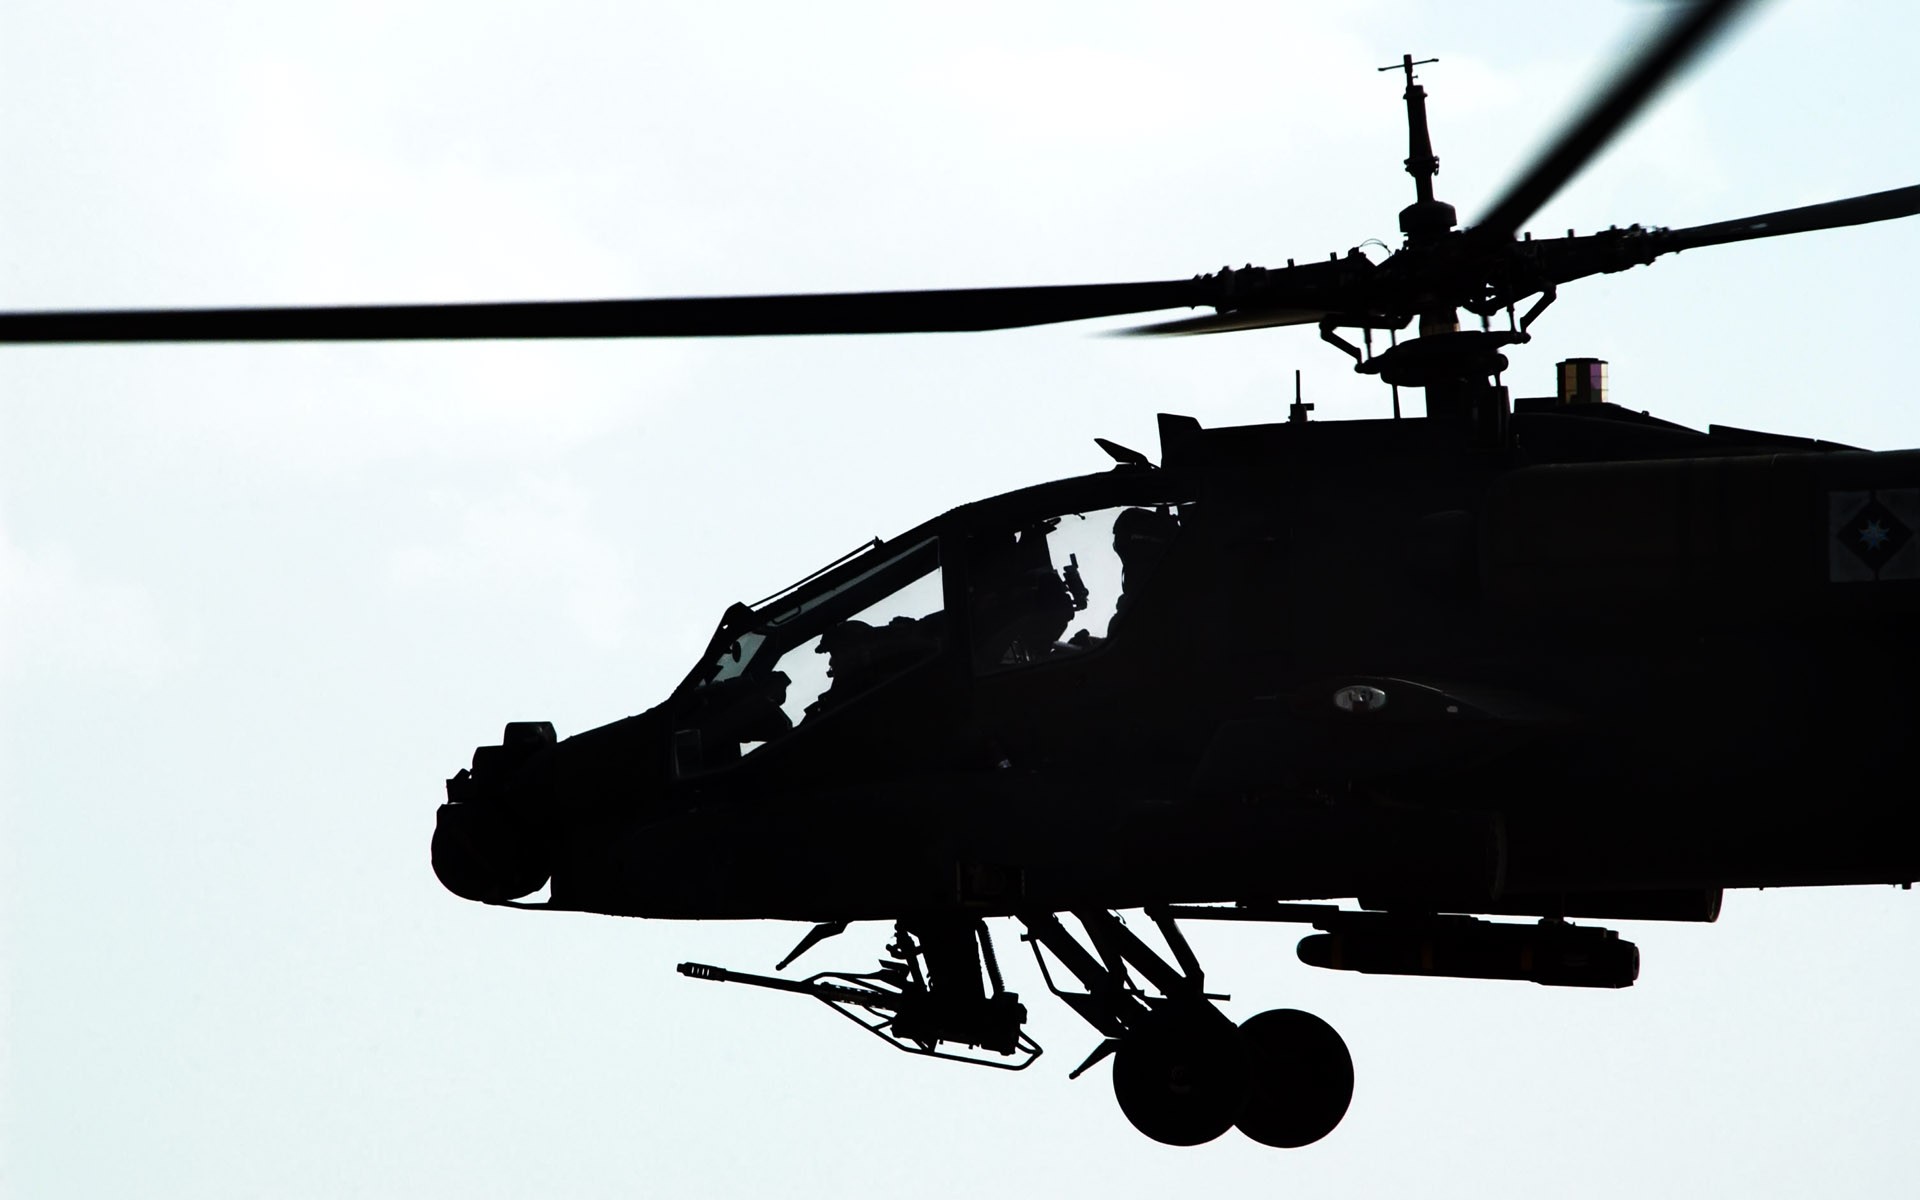 General 1920x1200 Boeing AH-64 Apache helicopters military silhouette military aircraft military vehicle vehicle Boeing American aircraft aircraft attack helicopters simple background pilot side view minimalism white background